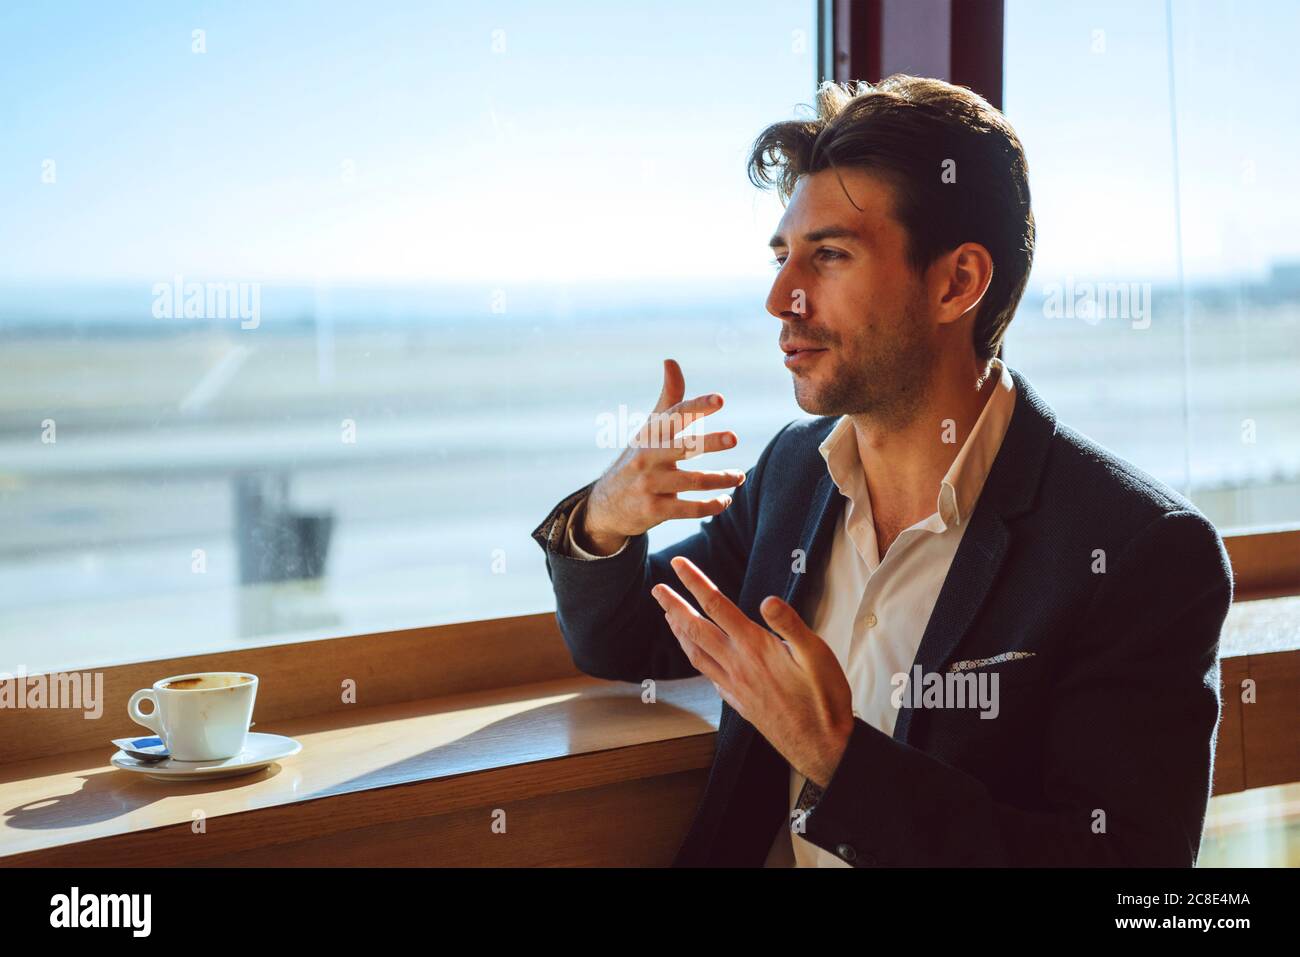 Thoughtful businessman gesturing at airport cafe Stock Photo